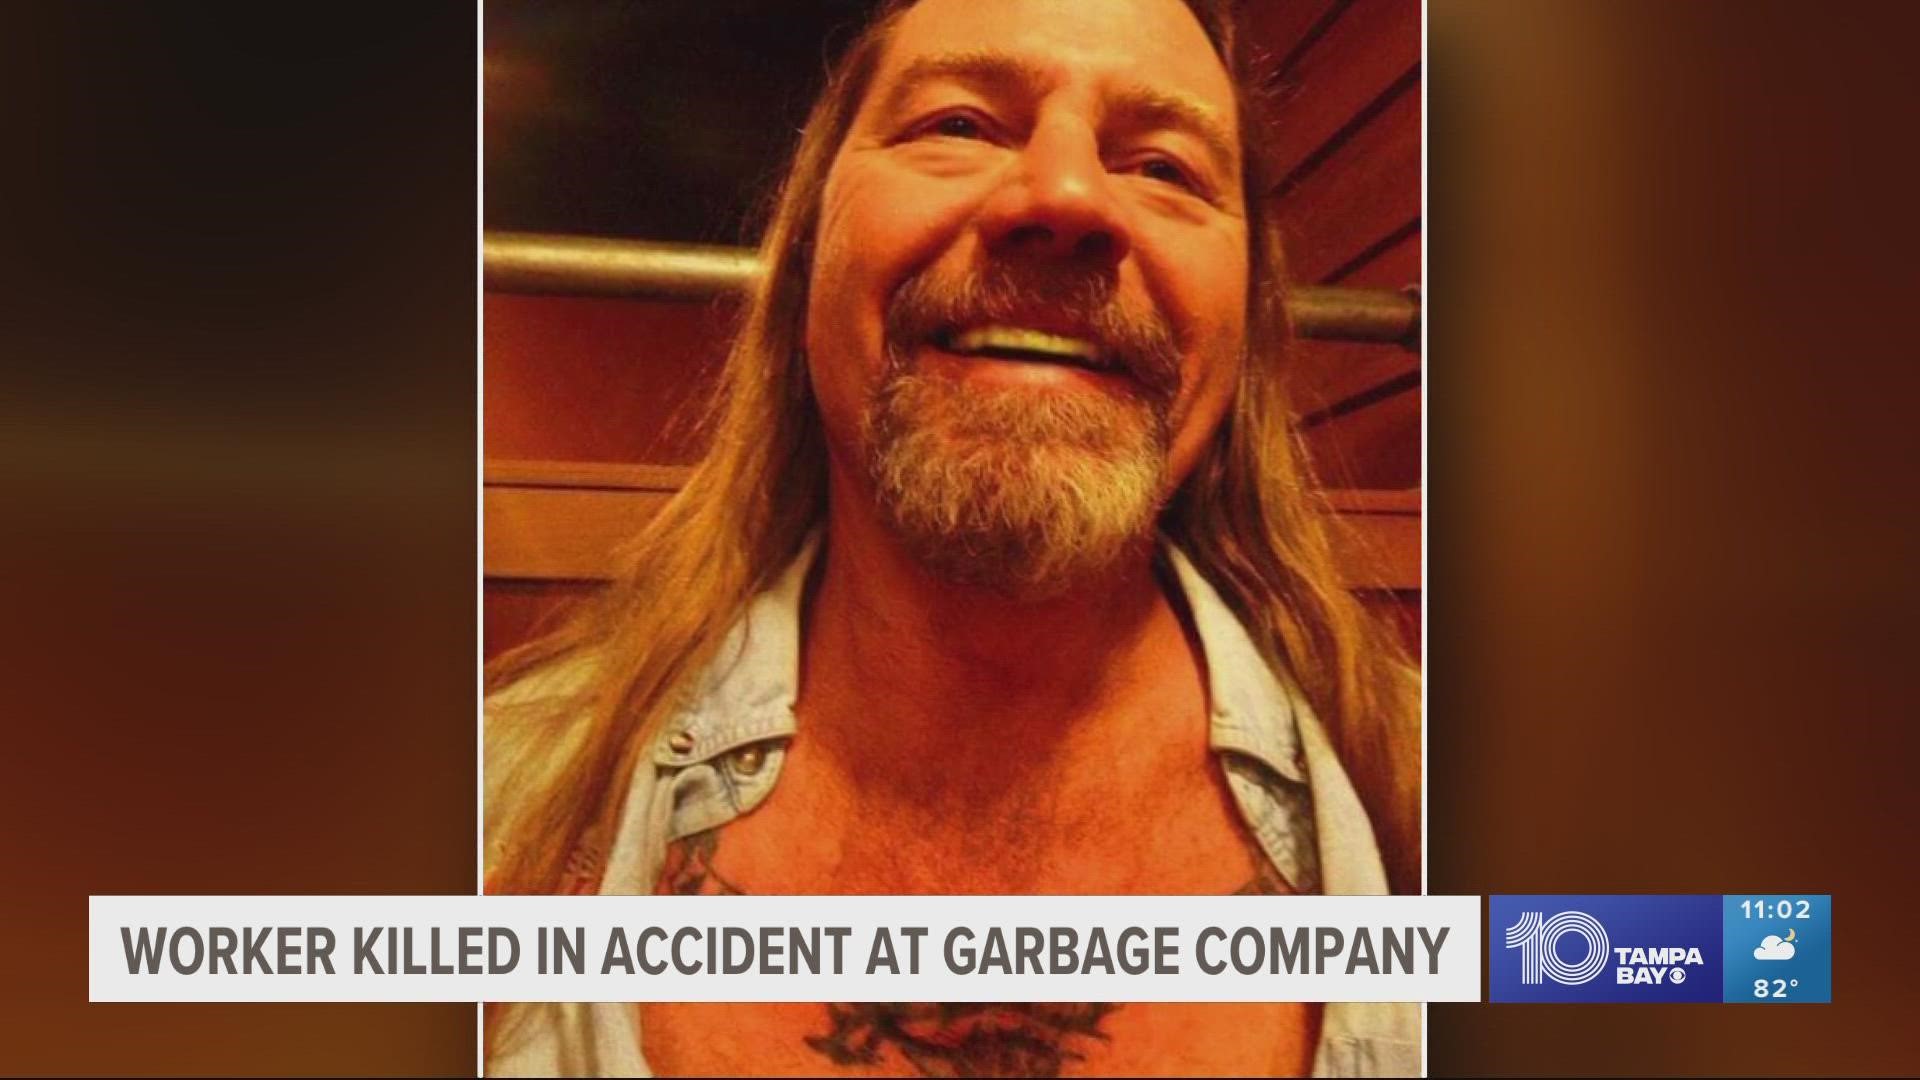 Leroy Firestone, 58, was standing on a ladder performing maintenance on the hydraulics of a garbage truck when the incident occurred, the sheriff's office said.